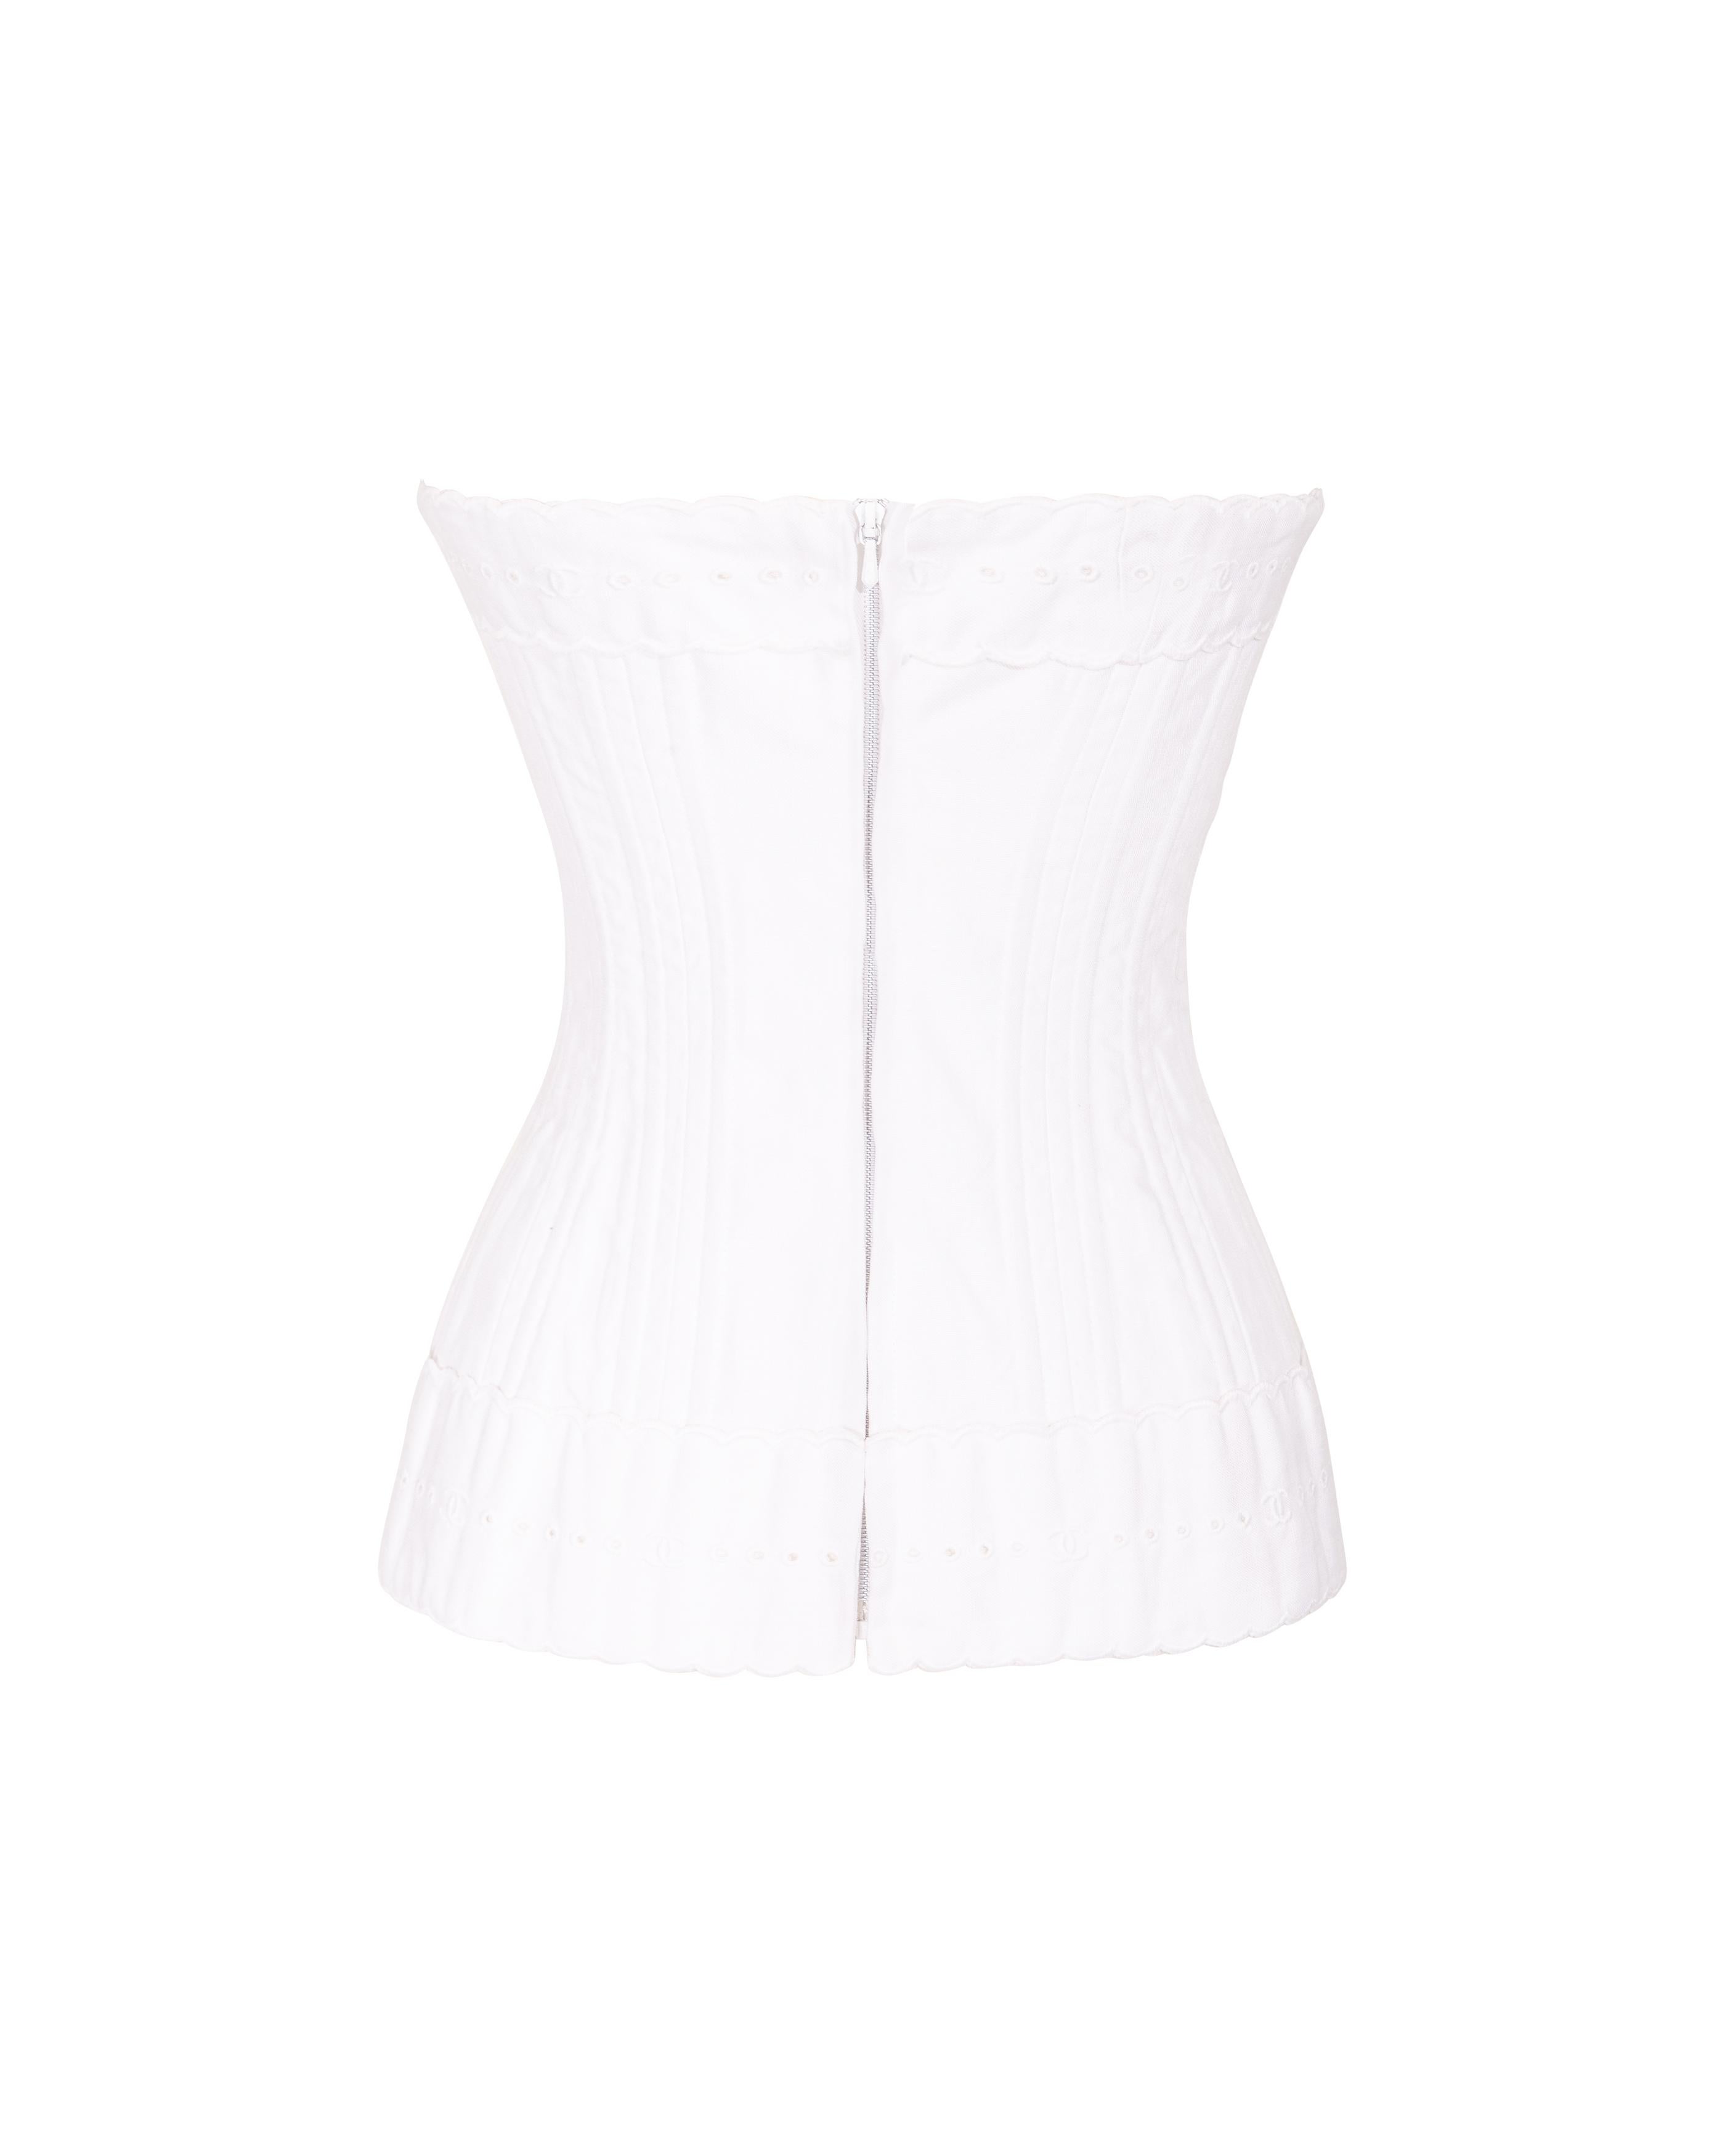 Women's S/S 1993 Chanel by Karl Lagerfeld White Strapless Corset